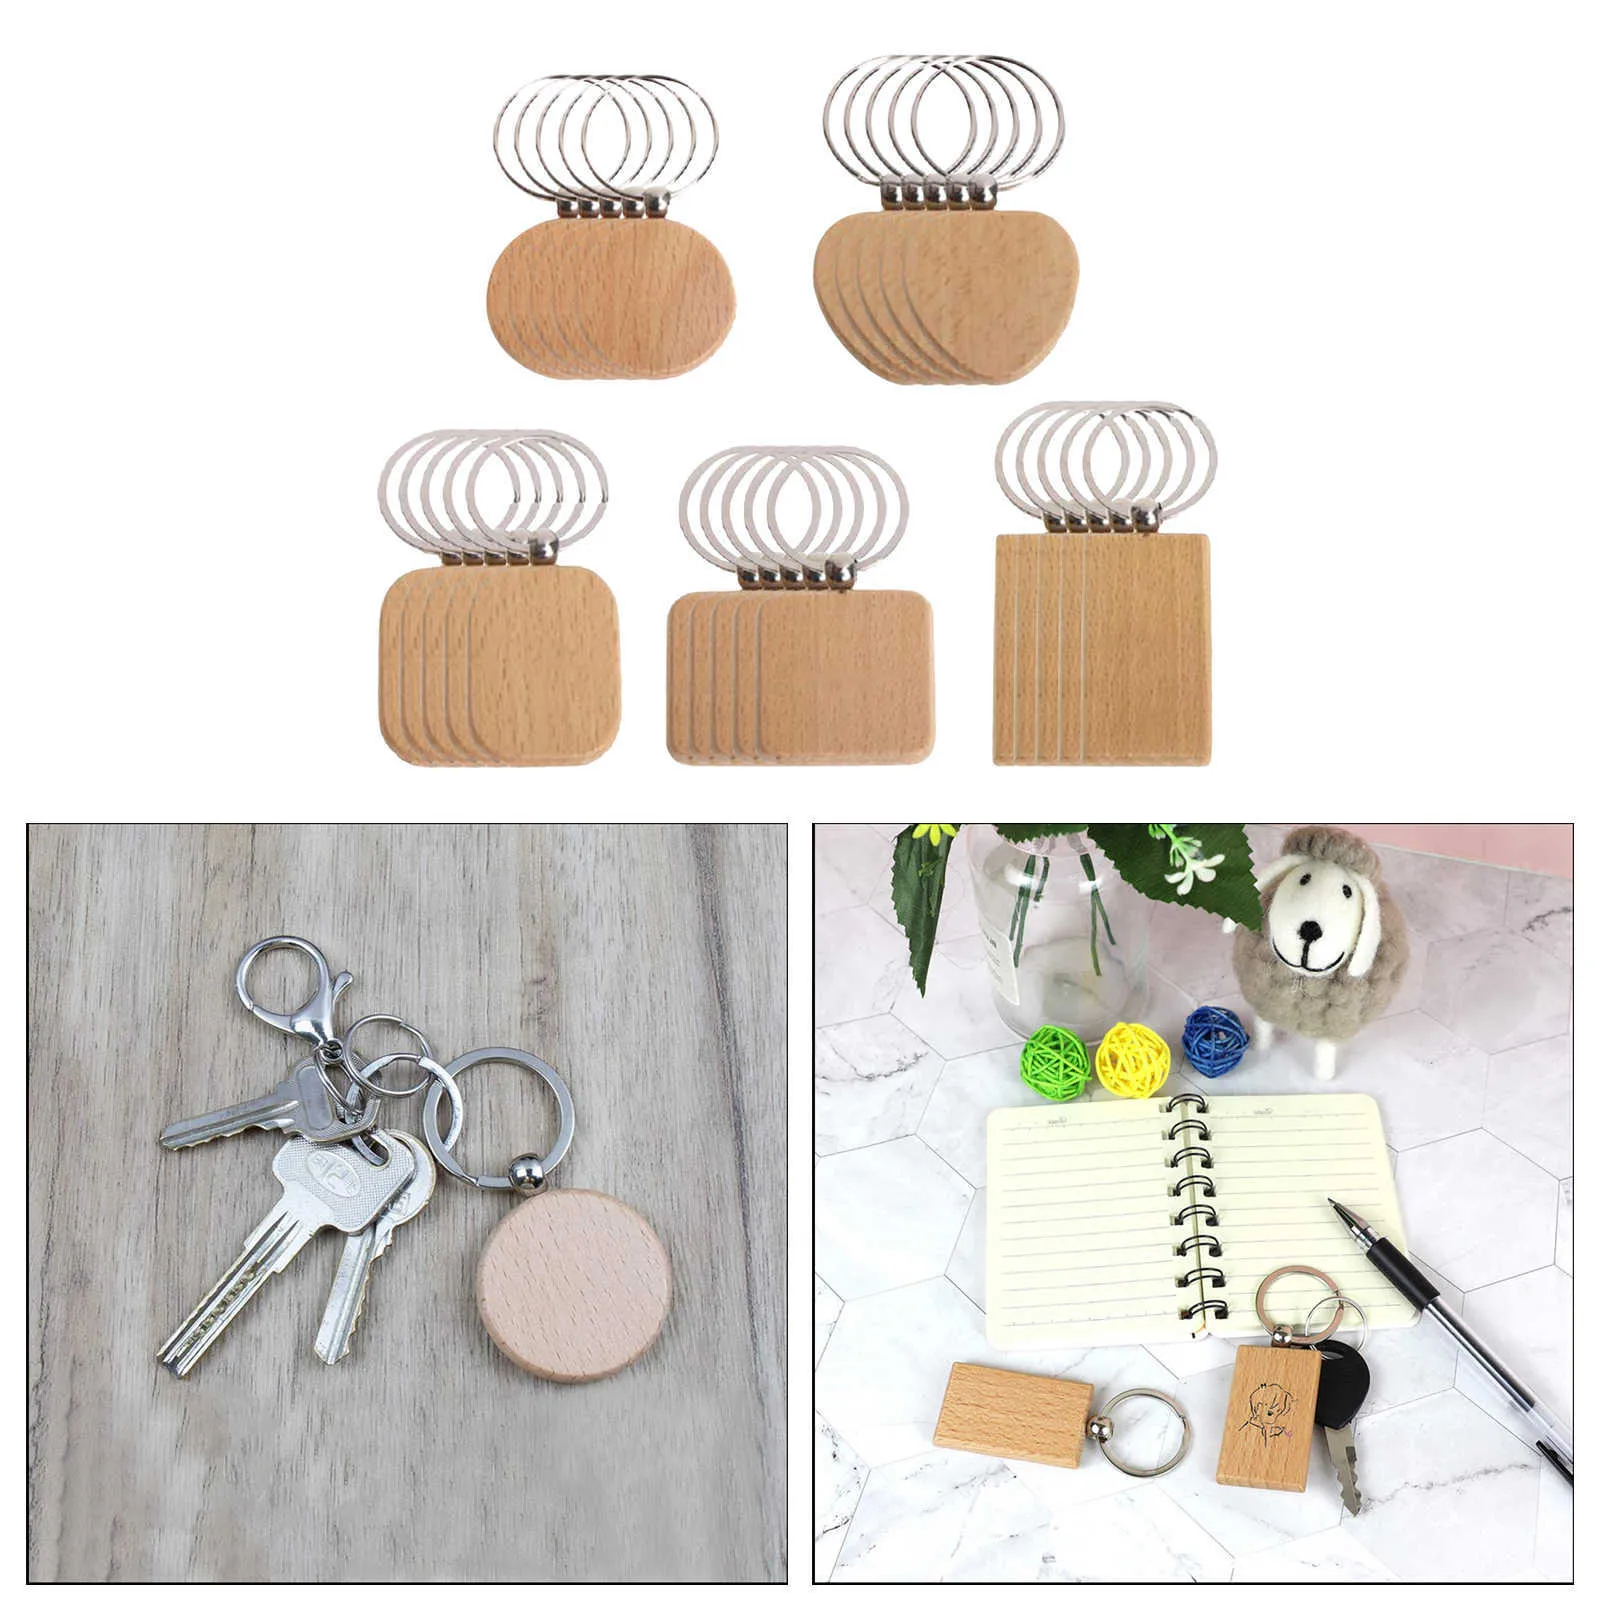 25Pieces Blank Wooden Key Chain Diy Wood Keychain Rings Key Tags Jewelry Findings Craft